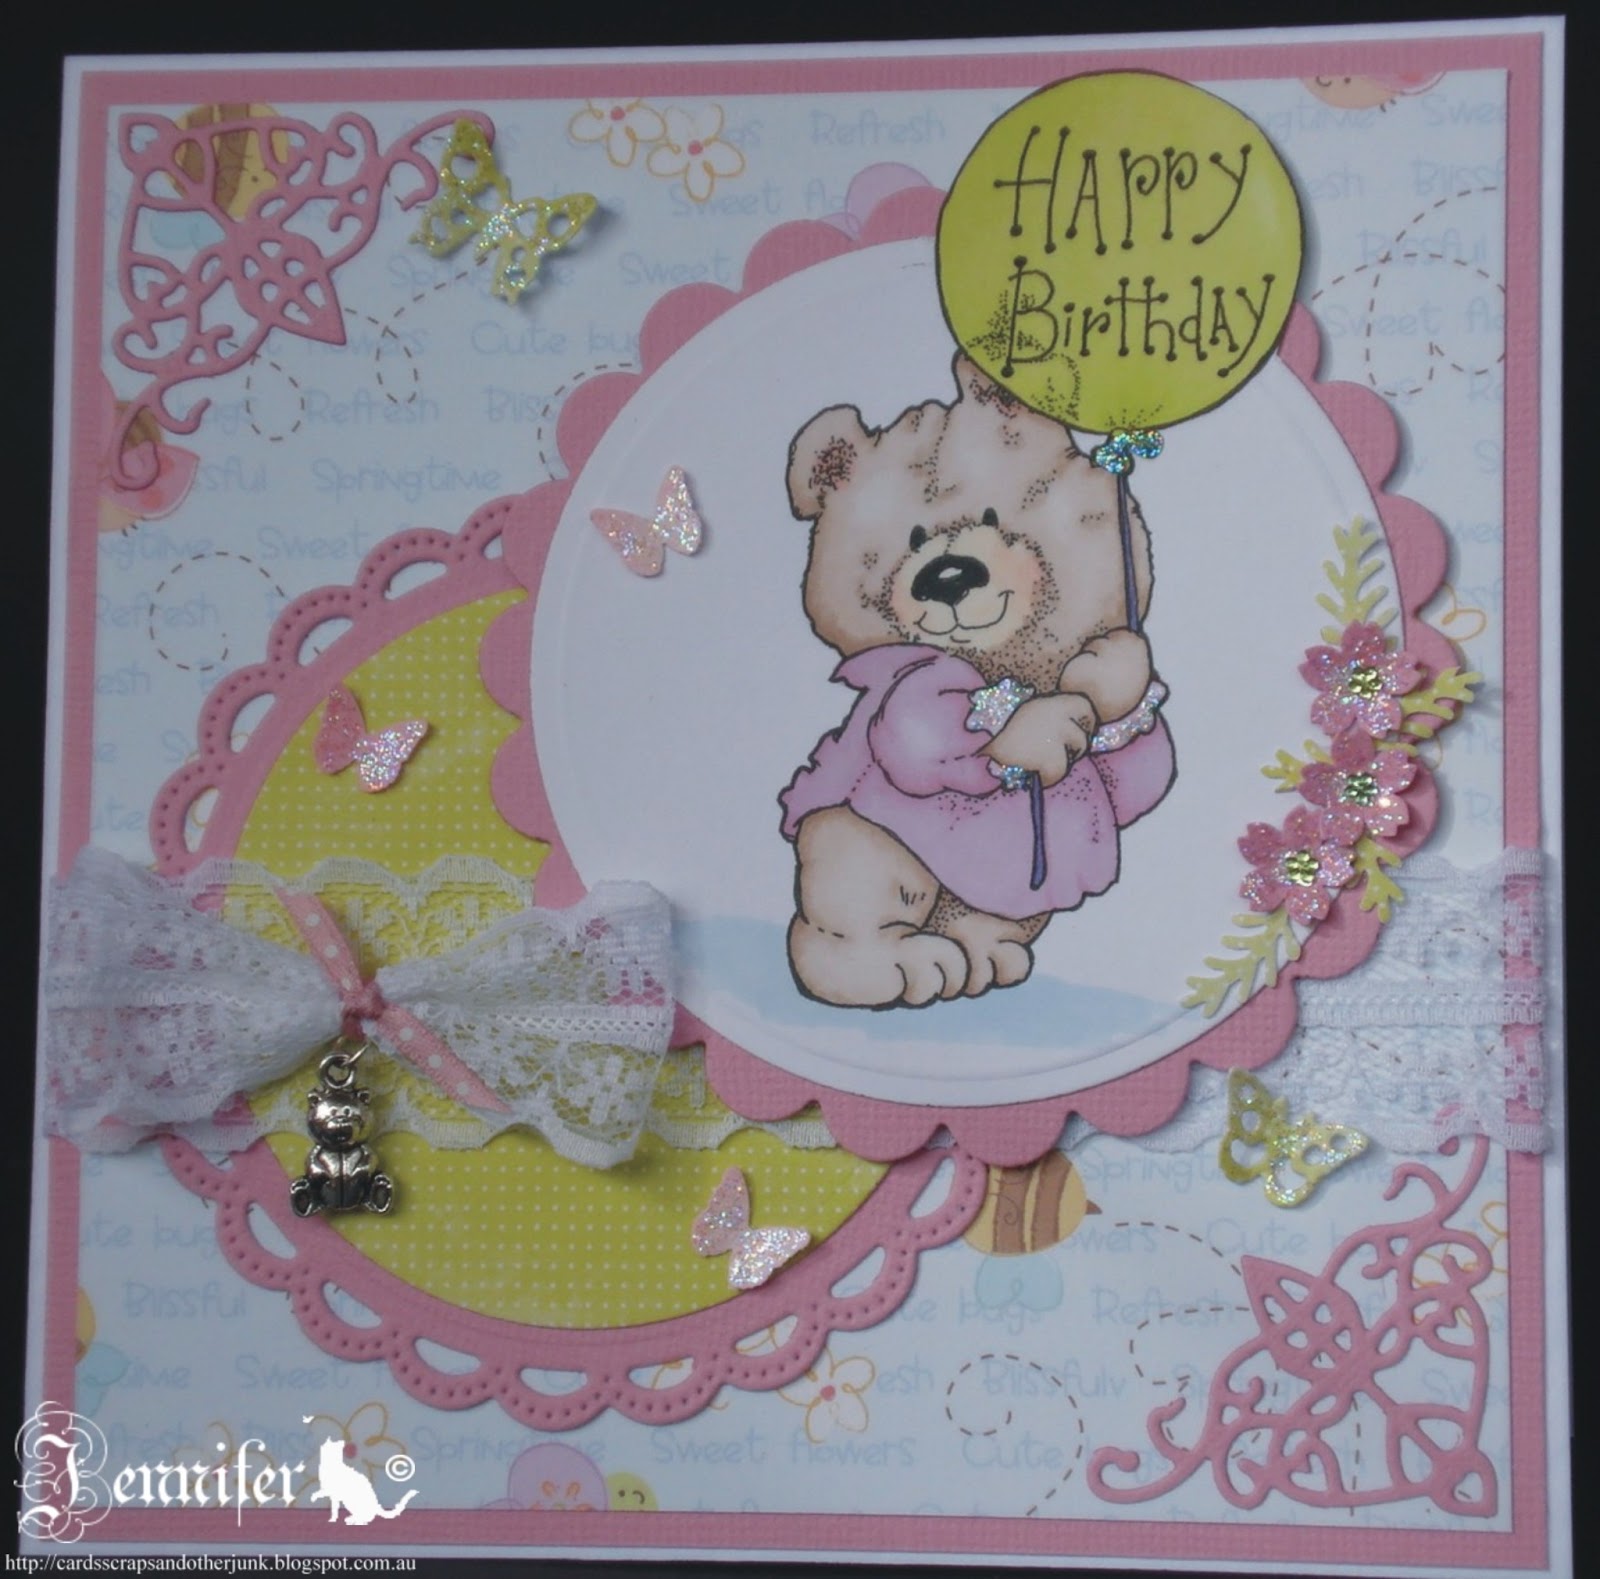 Penny's Paper-Crafty Challenge Blog: Challenge 112 - One for the girls